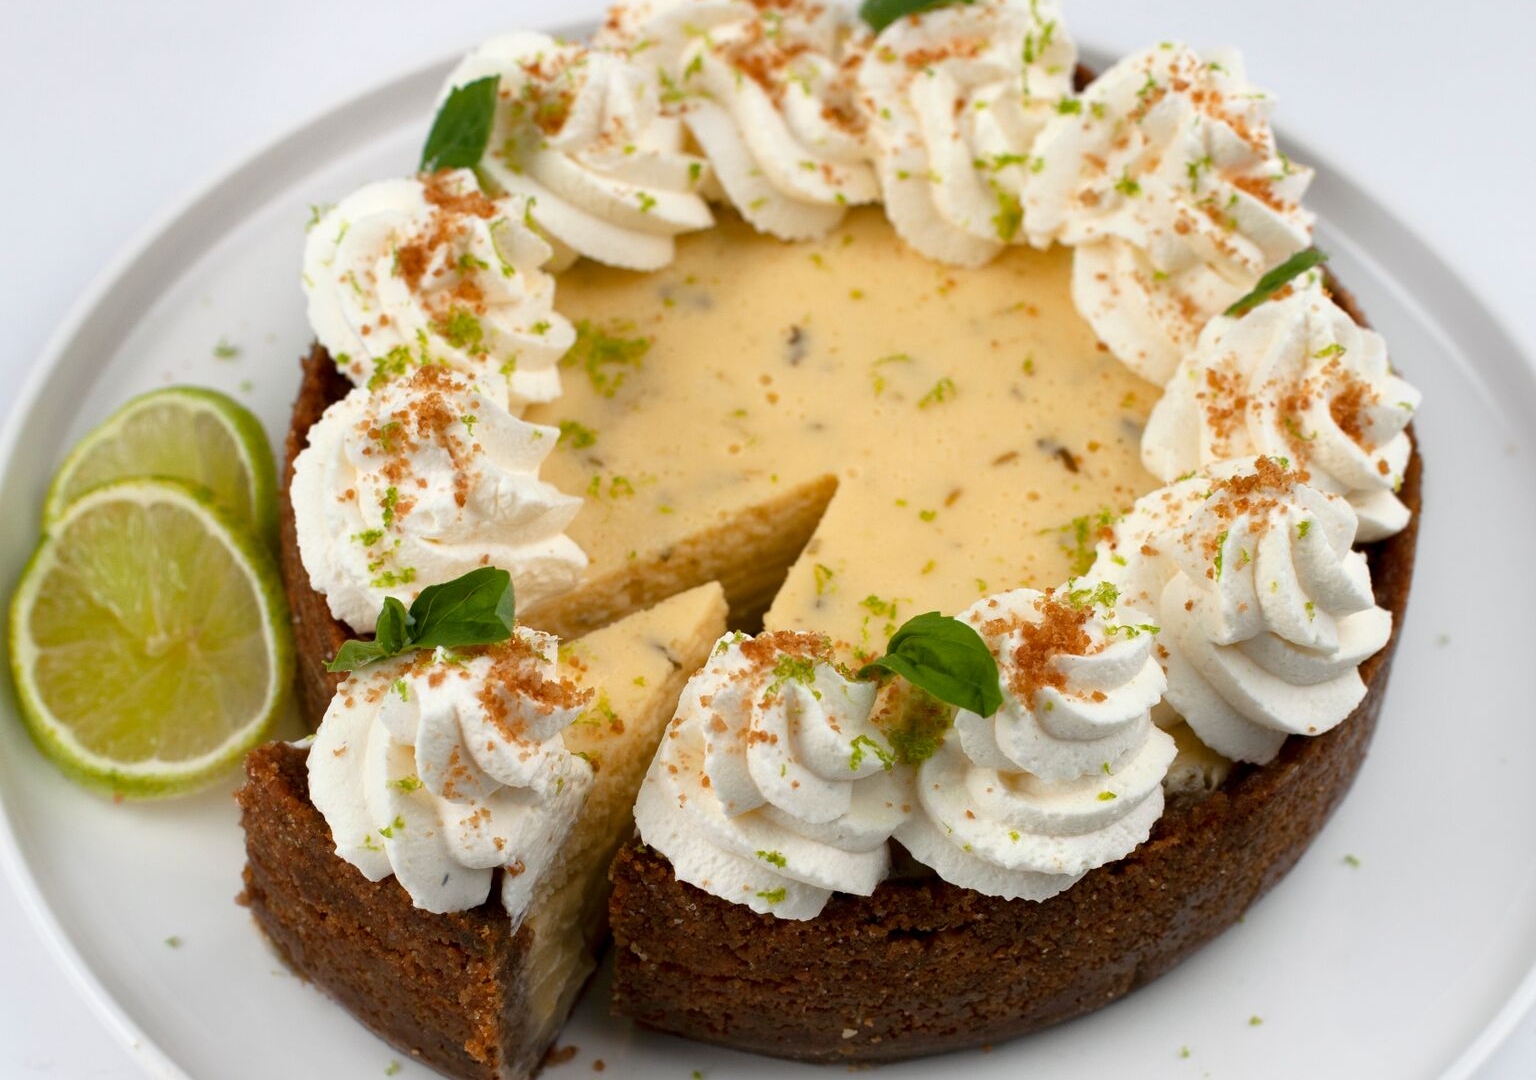 Lime and basil pie